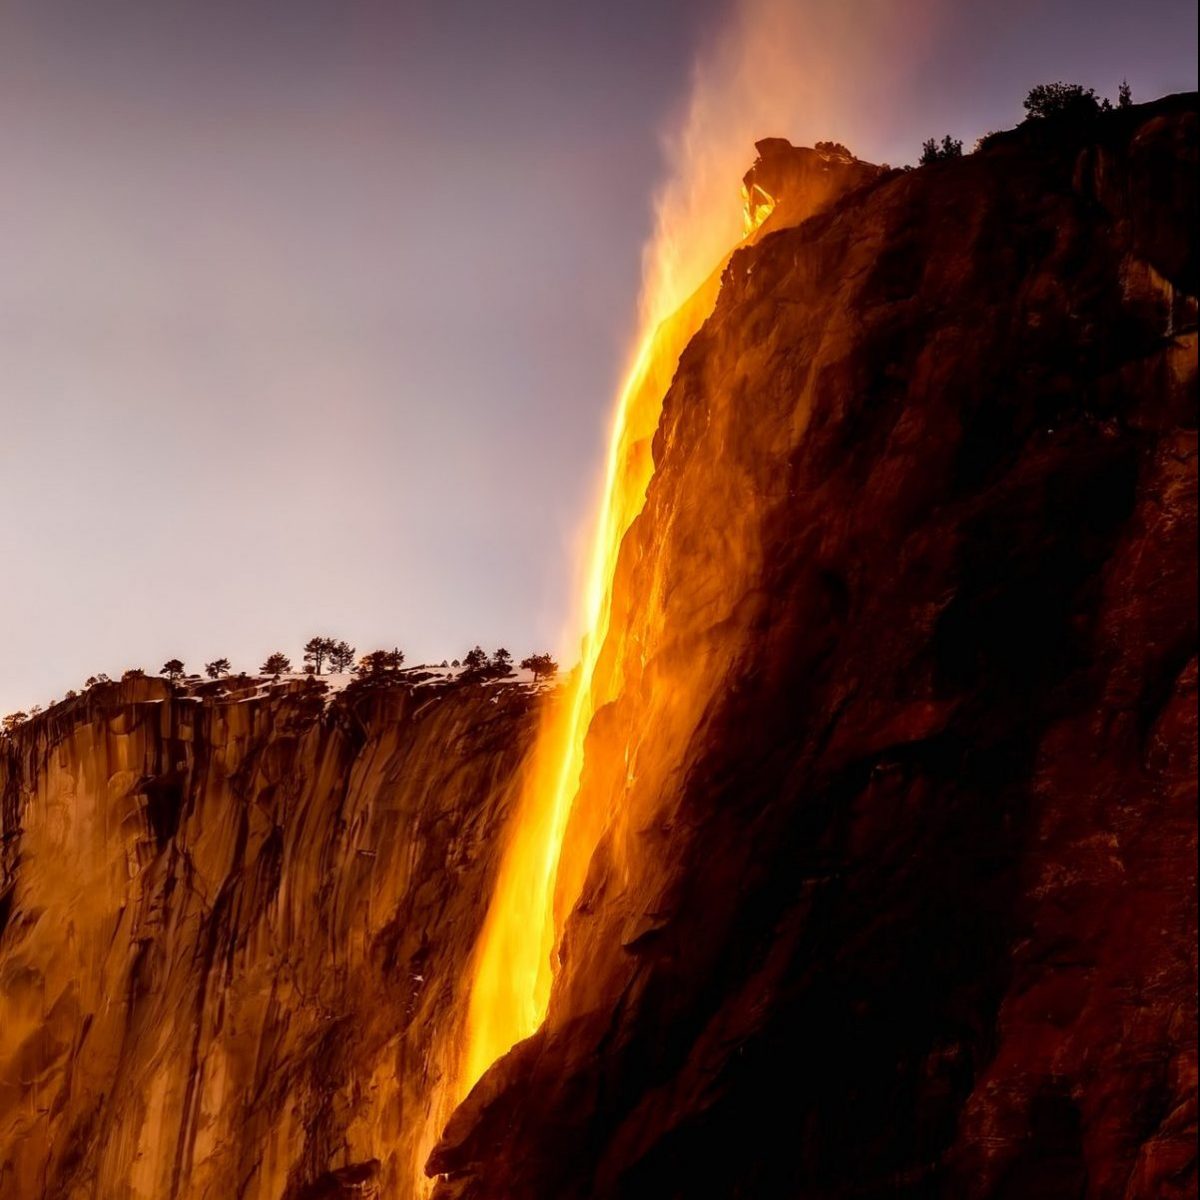 Firefall at Yosemite National Park During Winter